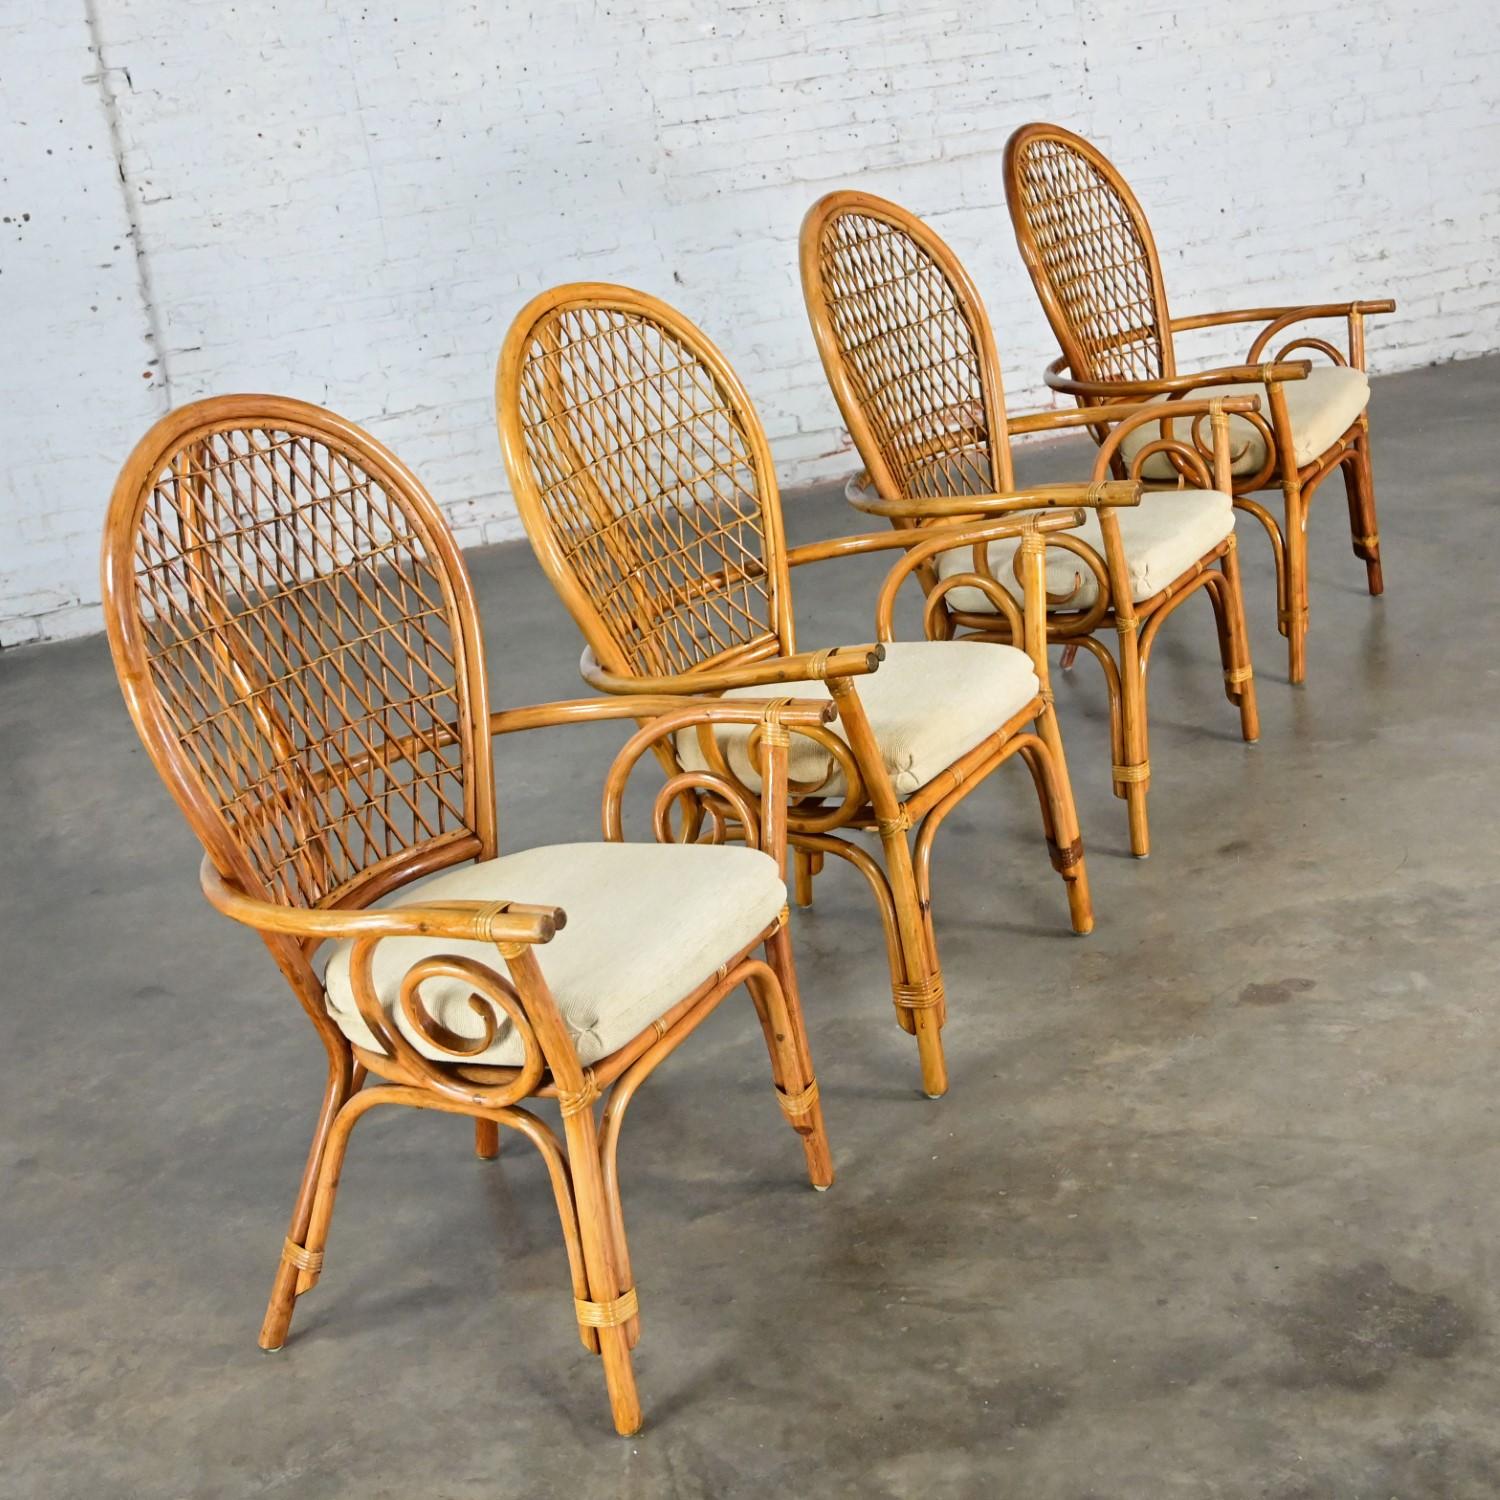 Handsome vintage Coastal Island Style or Hollywood Regency balloon back rattan dining chairs set of 4 with off-white fabric upholstered seat cushions. Beautiful condition, keeping in mind that these are vintage and not new so will have signs of use